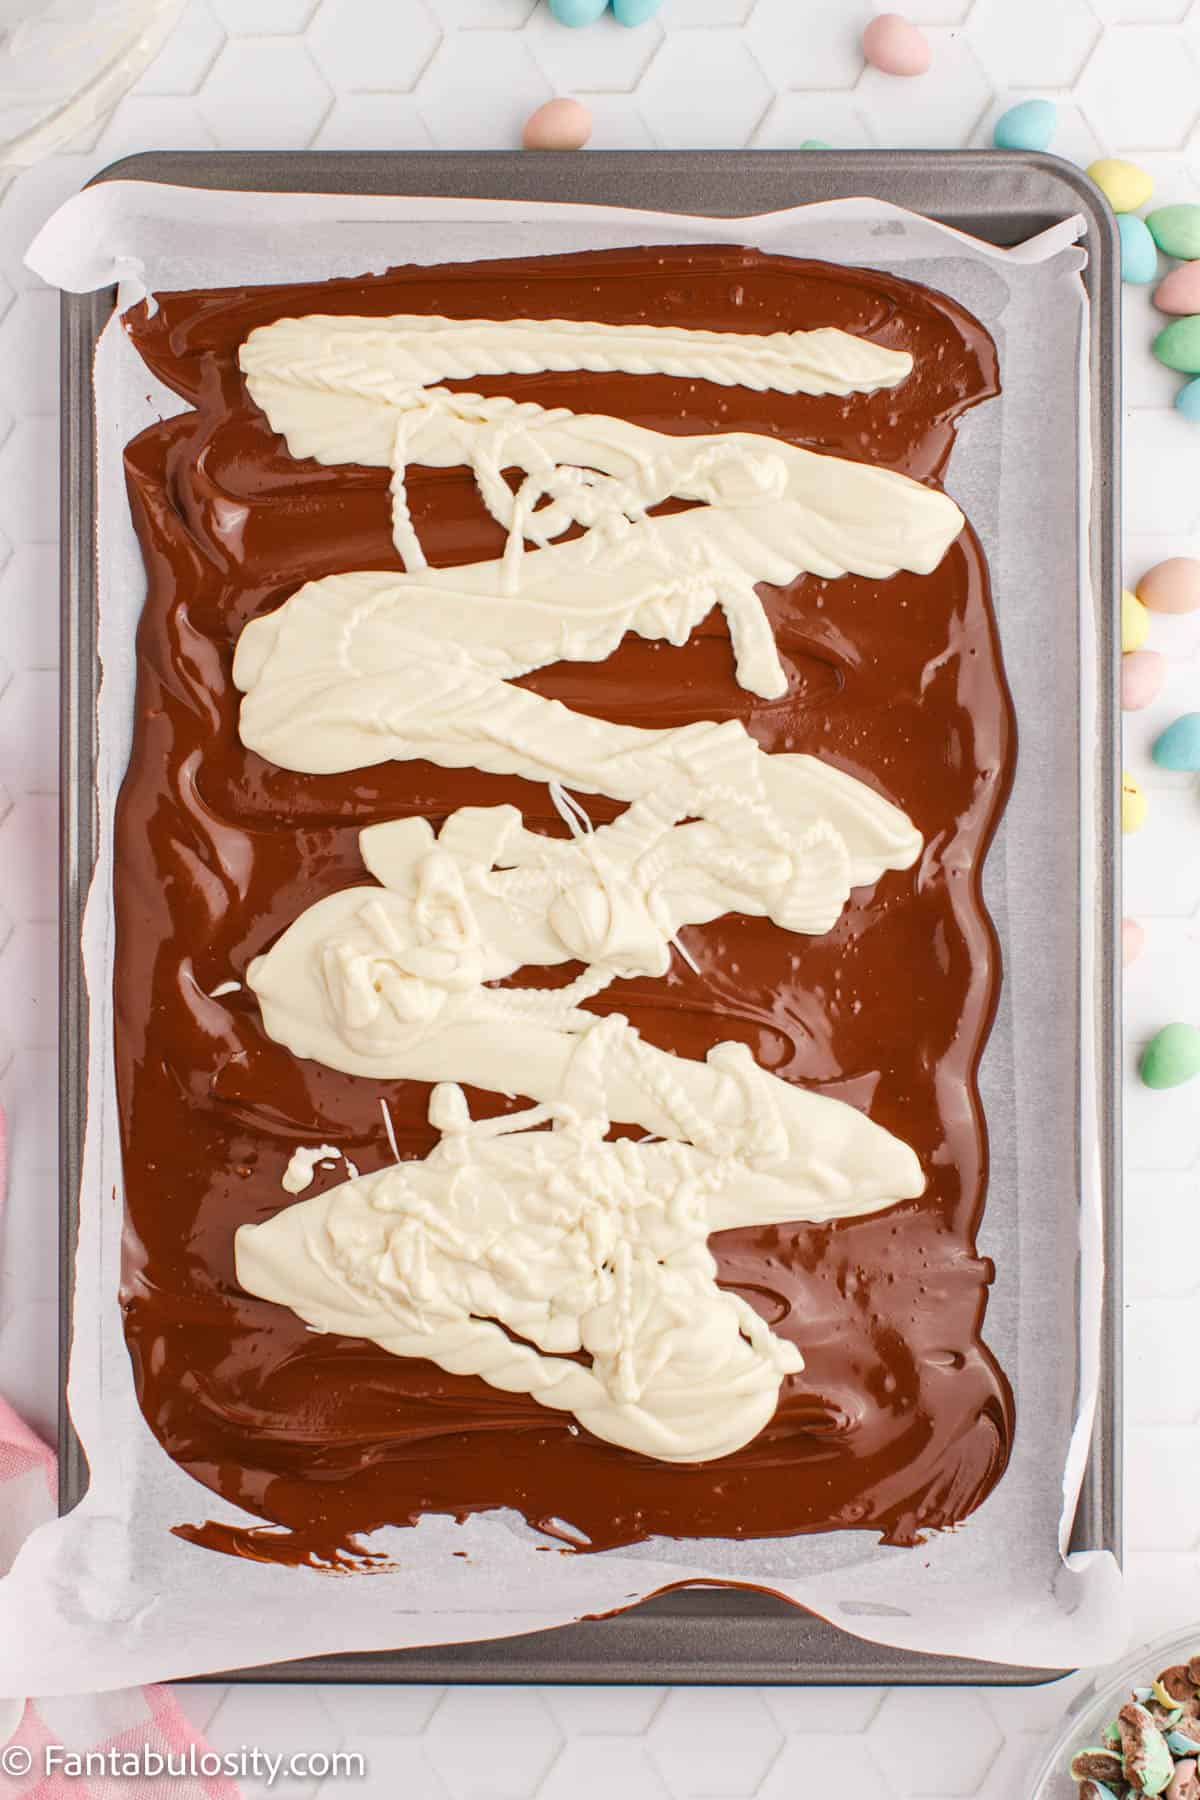 Melted white chocolate drizzled over the melted semi-sweet chocolate.